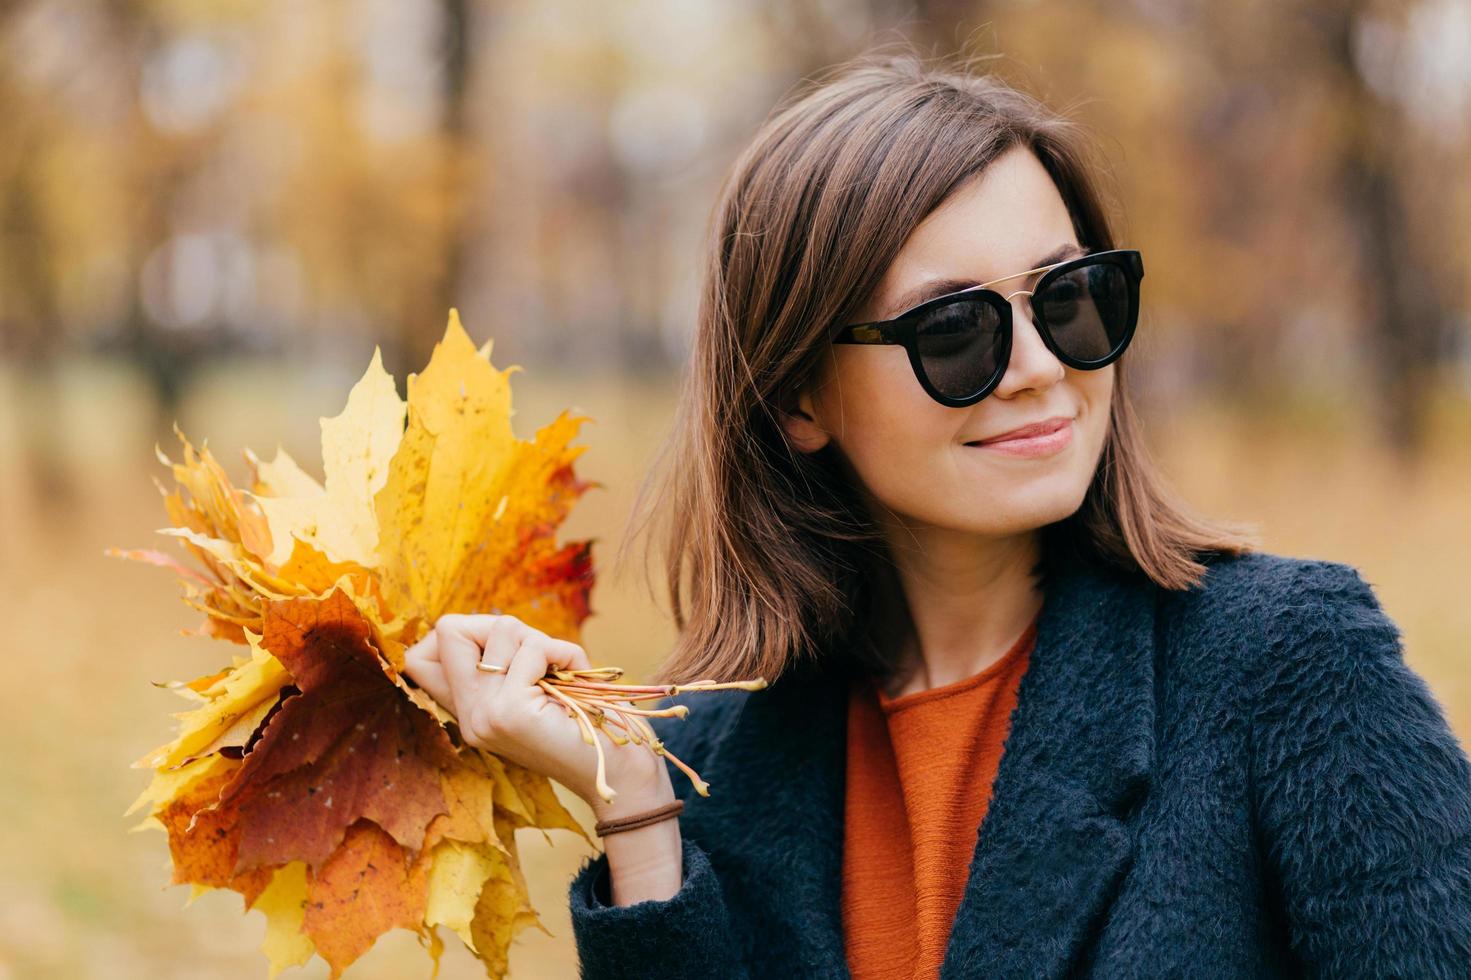 Close up shot of pretty woman with hair, wears sunglasses, has stroll during sunny day in autumn in park, carries yellow leaves, looks thoughtfully aside. People, season and lifestyle concept photo